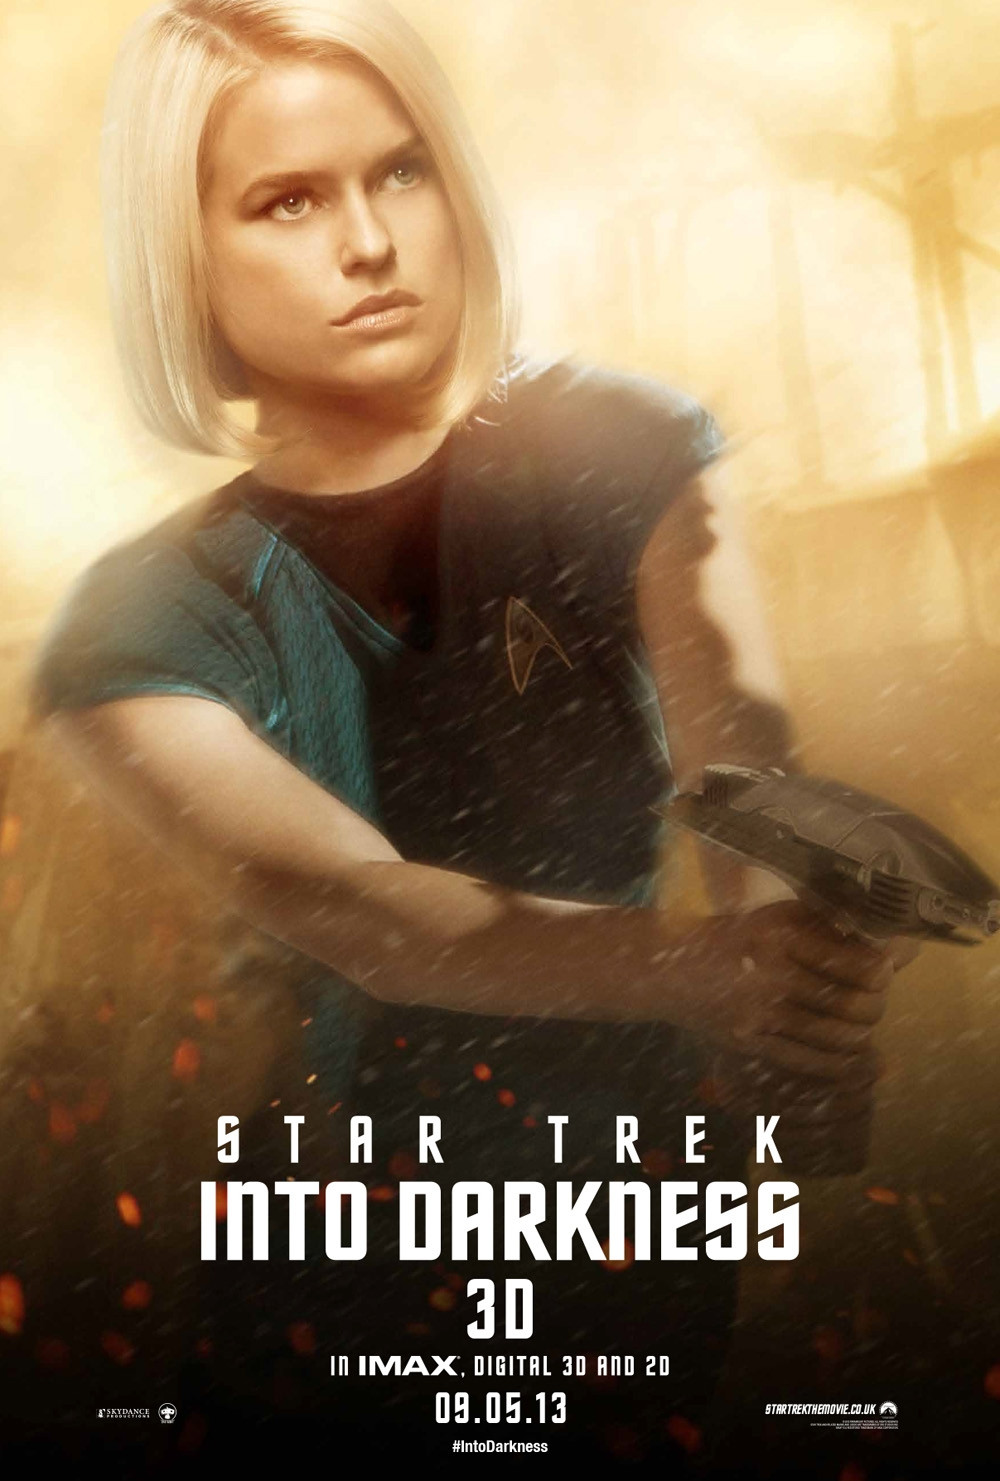 UPDATE: New Character Banners For STAR TREK INTO DARKNESS Unveiled